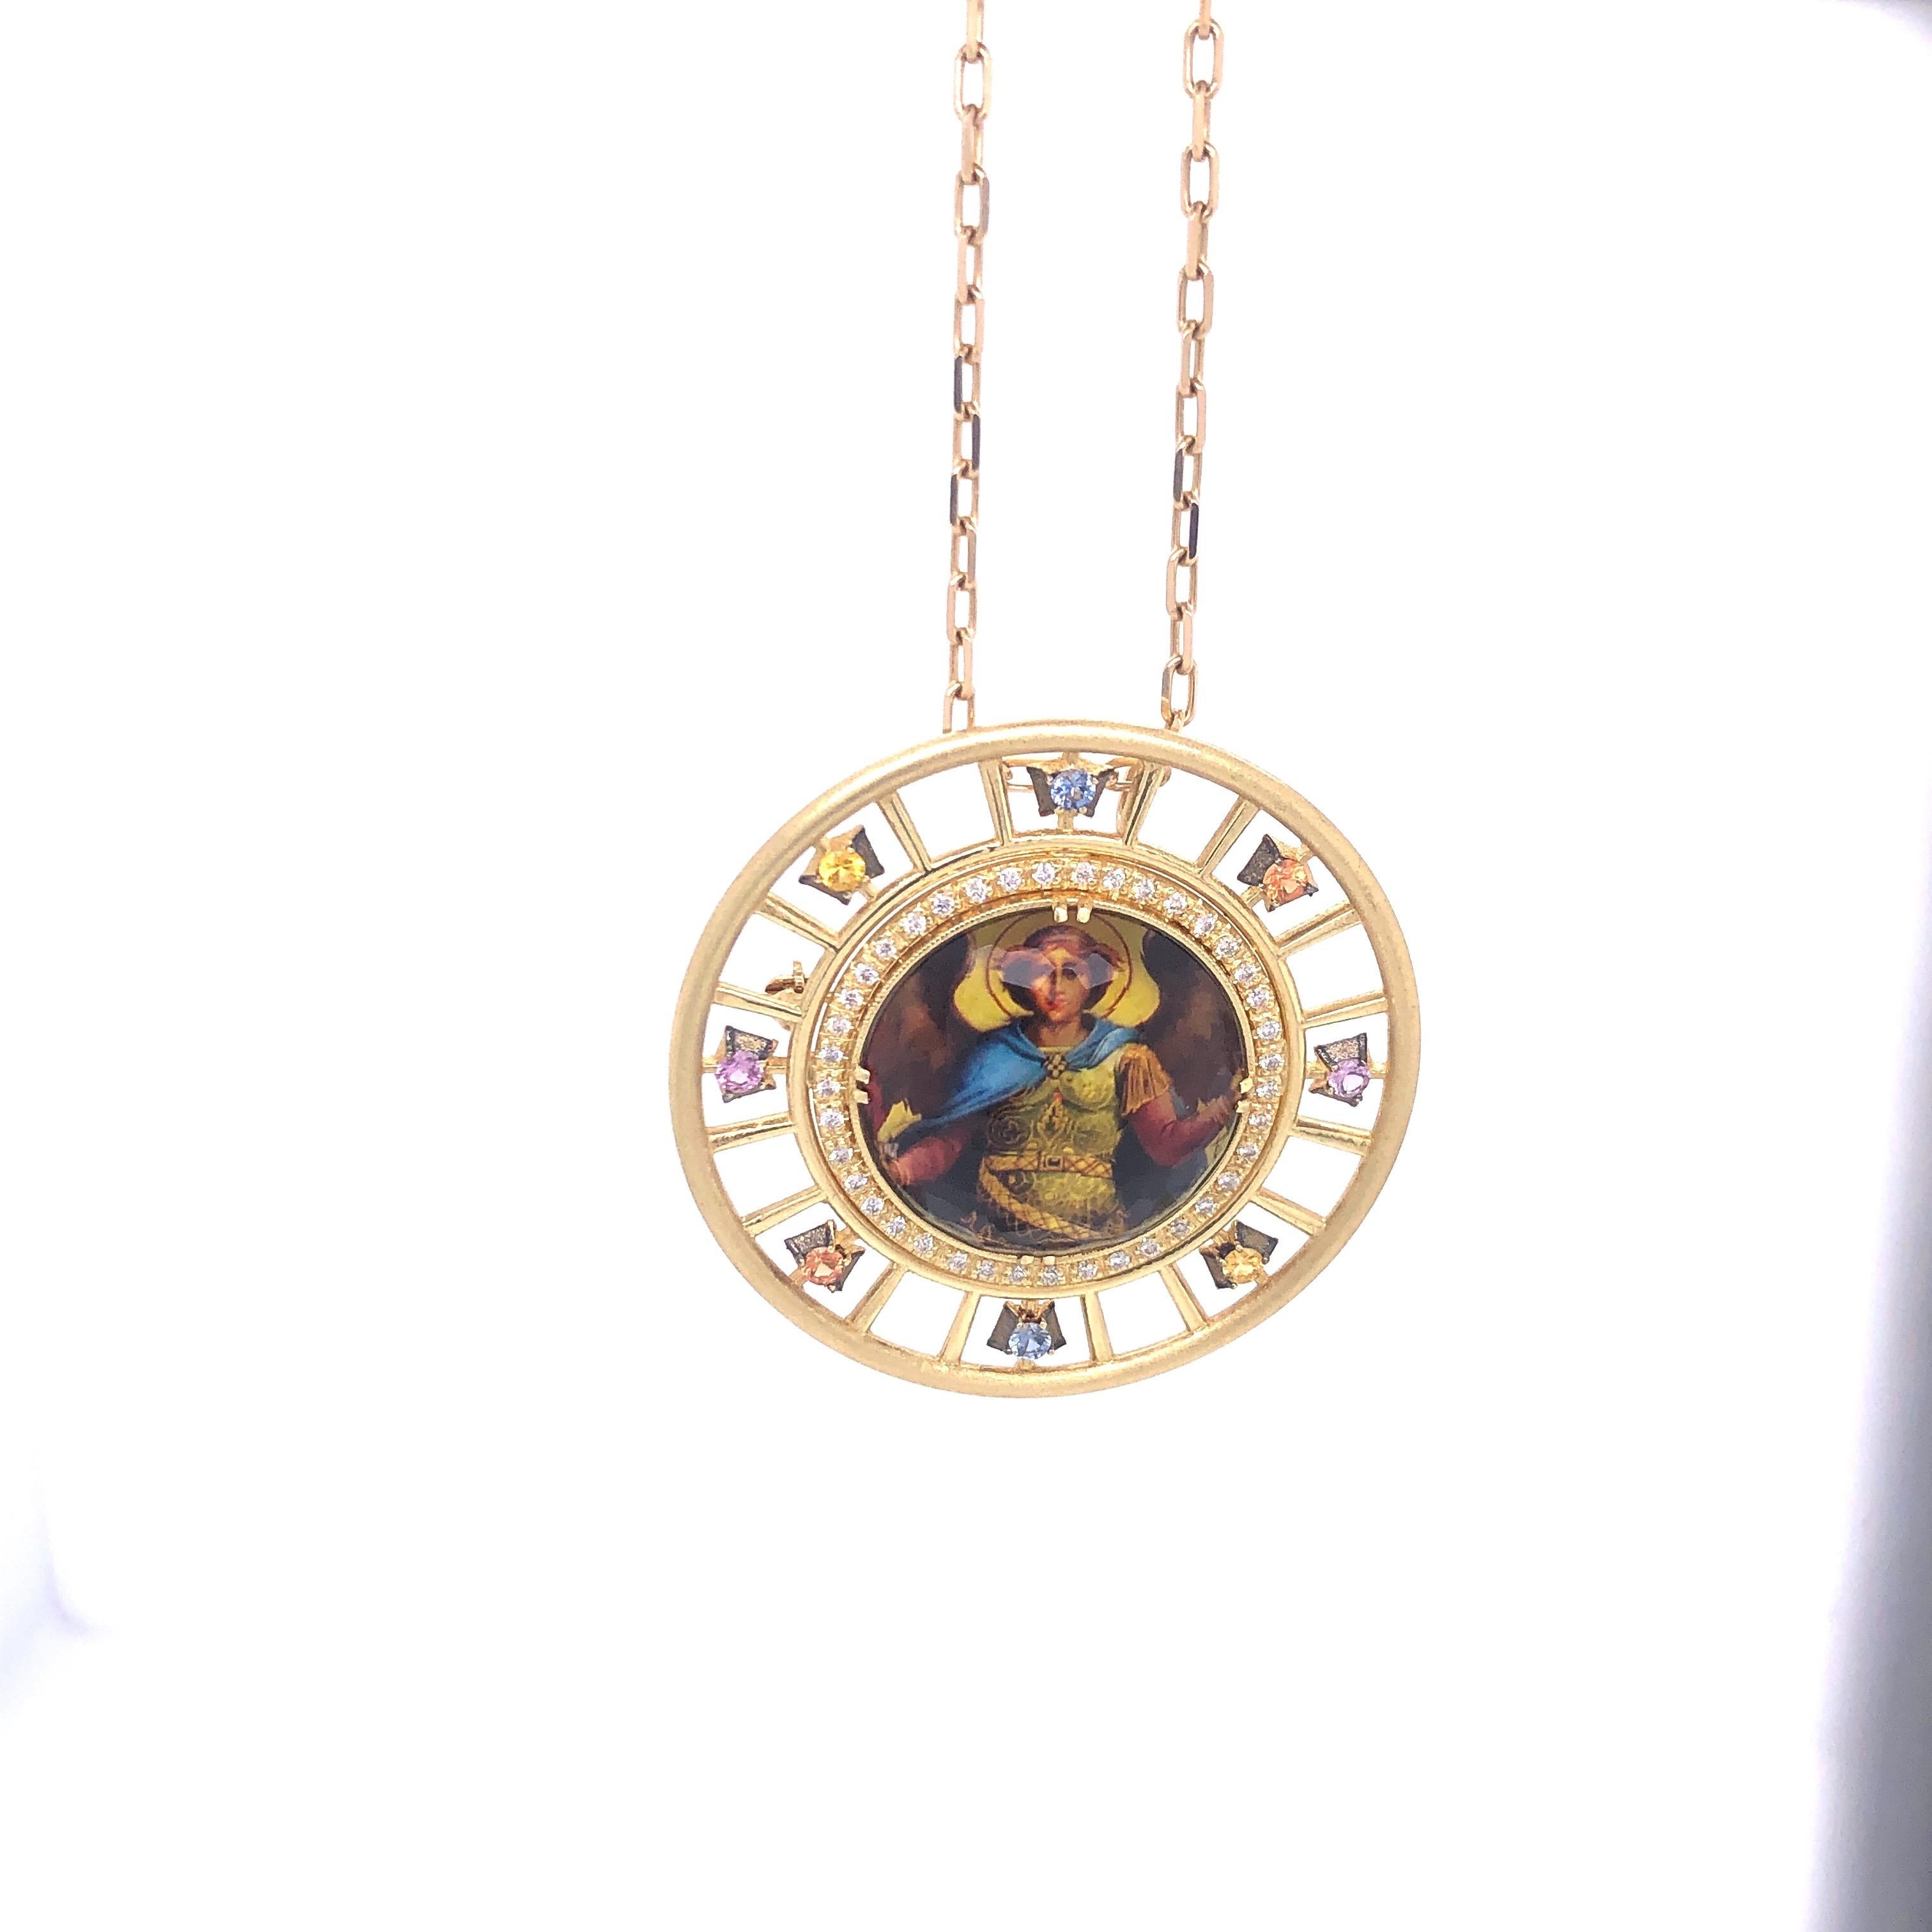 From Award Winning Designer Melissa Spencer:  Angel St. Michael  Spencer Portrait  in 18K Yellow Gold with 40 Diamonds (.40cts),  2 Yellow, 2 Orange, 2 Blue  and 2 Pink Sapphires (.64cttw).  Paperclip Chain not included.  
This elegant setting